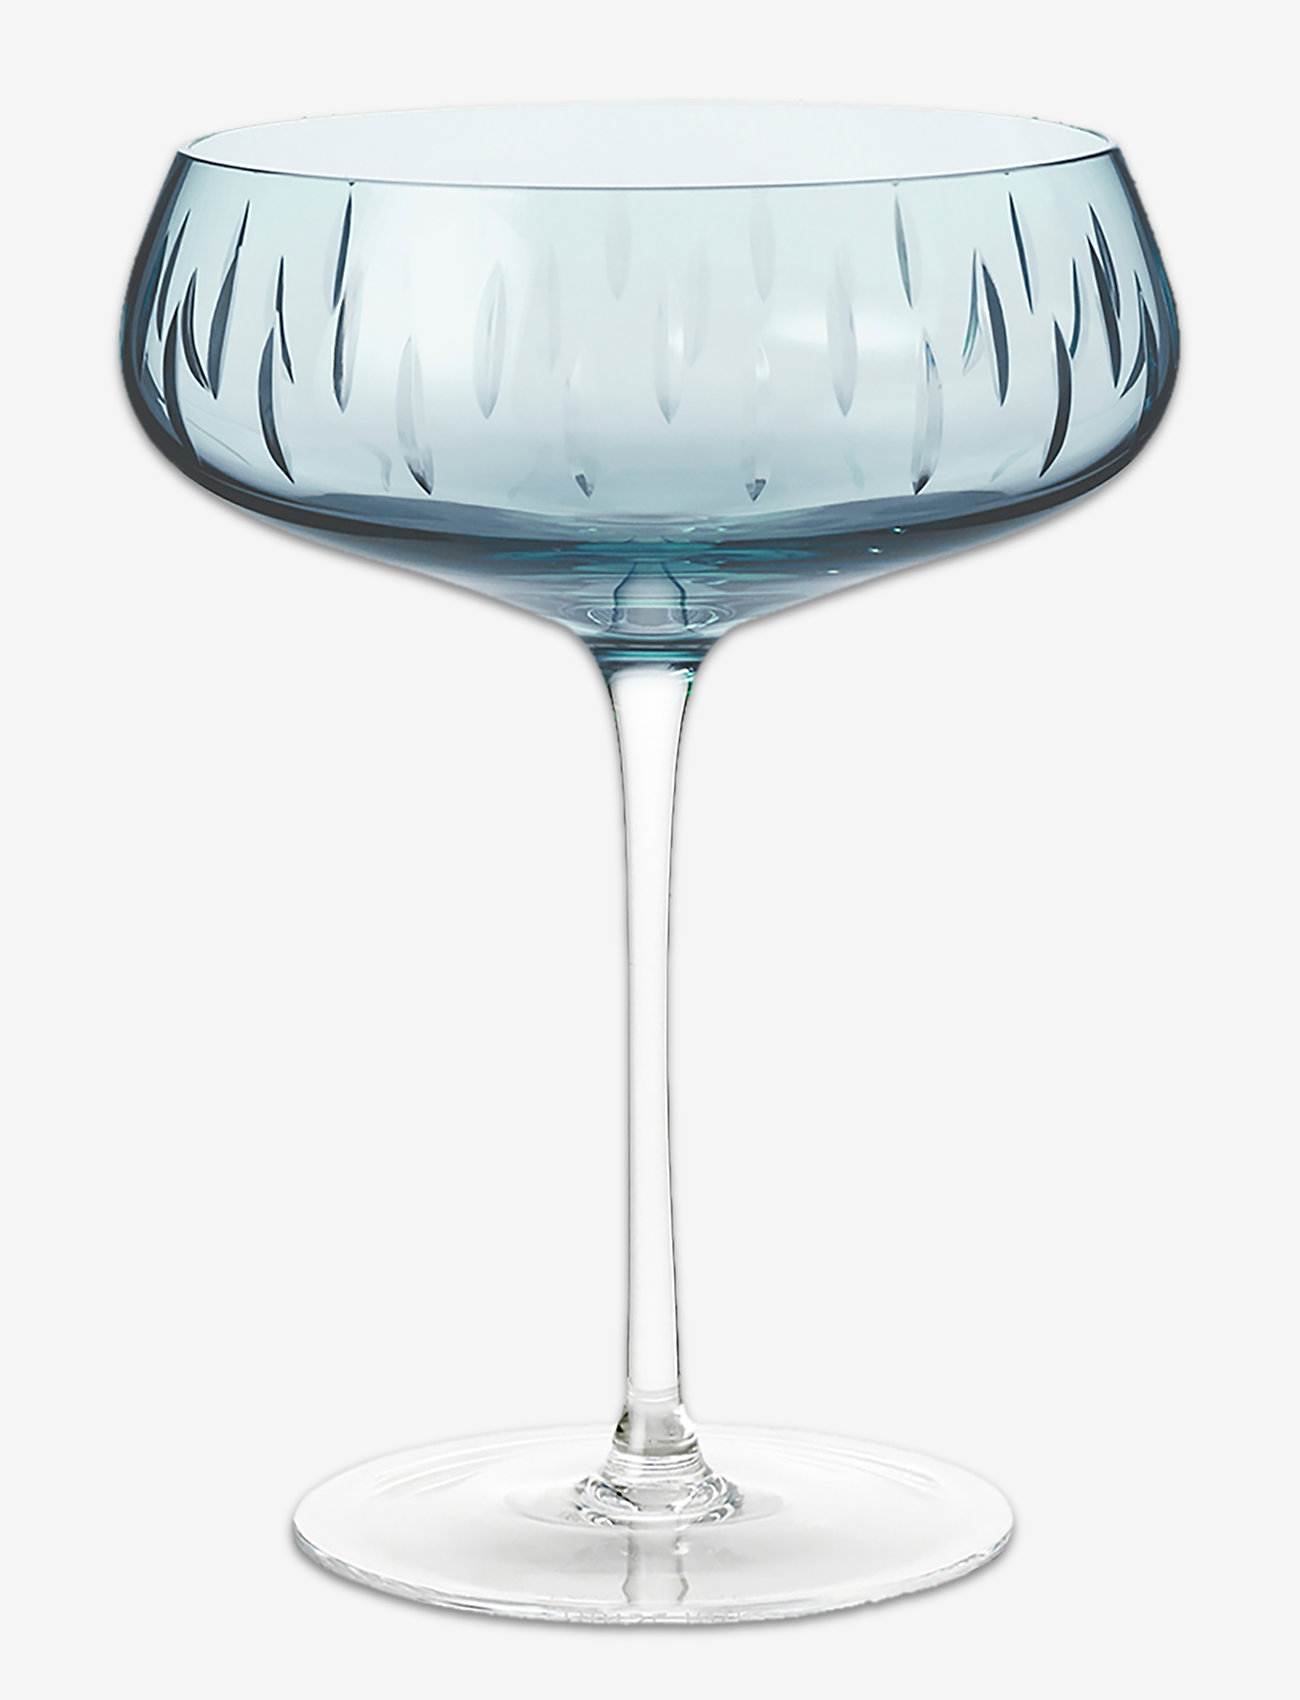 LOUISE ROE - Champagne Coupe - champagneglass - blue - 0